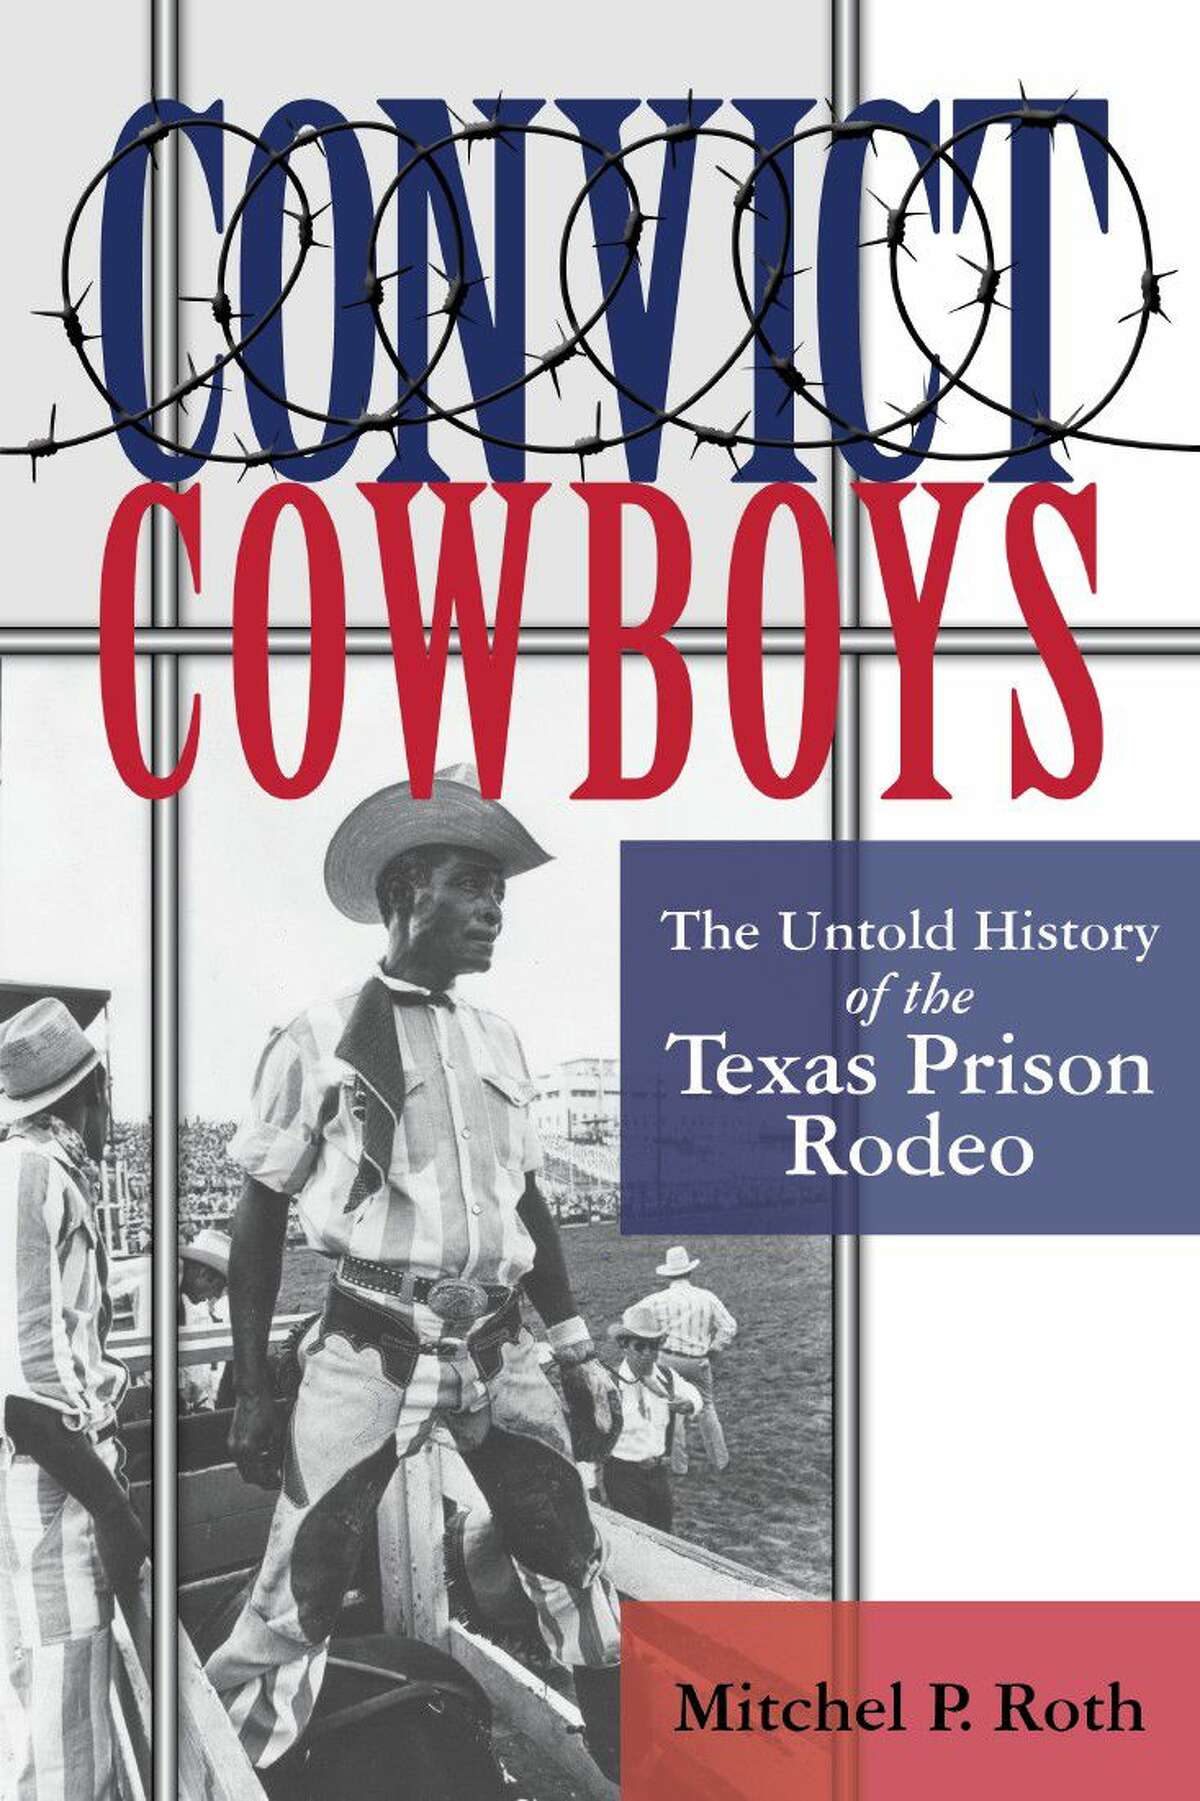 Houston book reading to relive Texas Prison Rodeo glory days